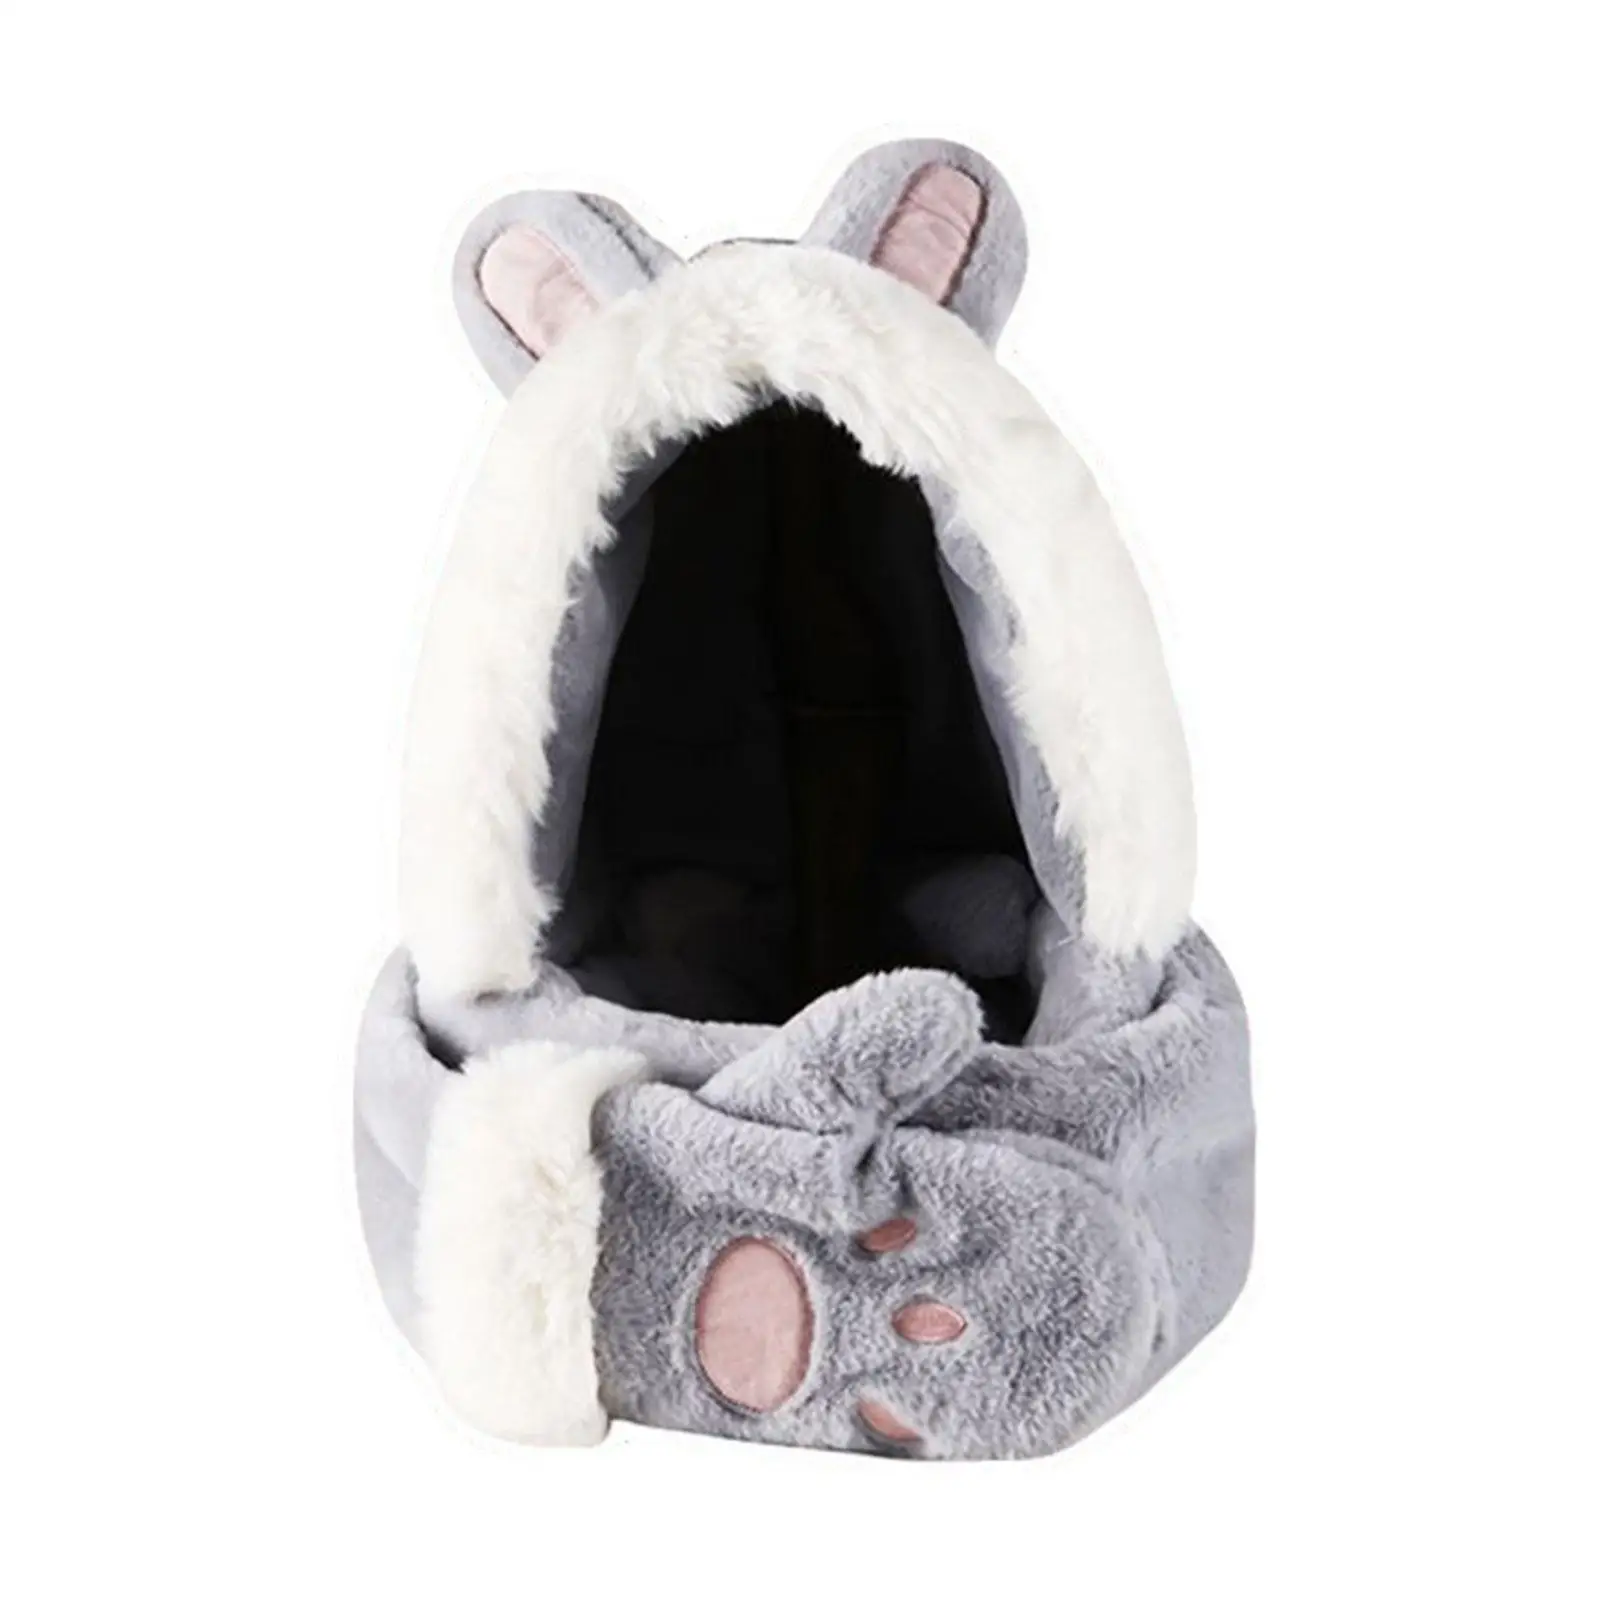 WomenS Hooded Scarf with Glove Pockets Rabbit Ears Neck Warmer Plush